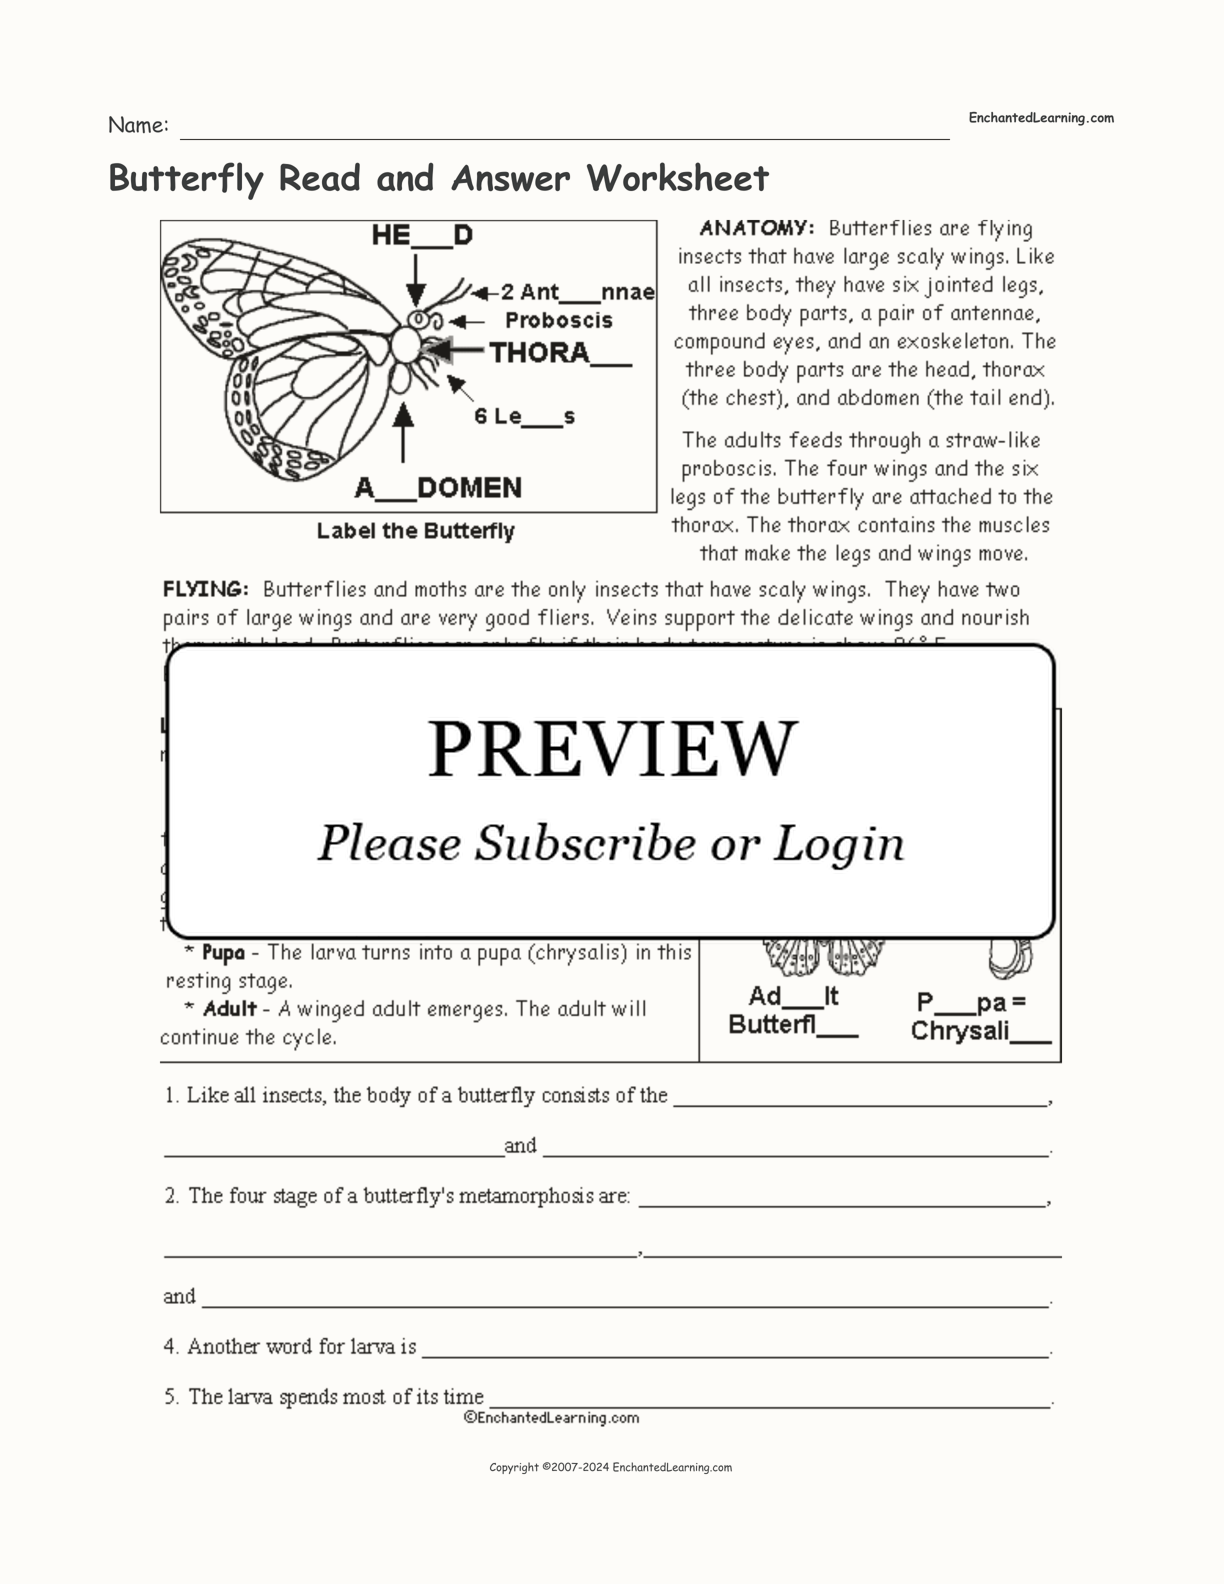 Butterfly Read and Answer Worksheet interactive worksheet page 1